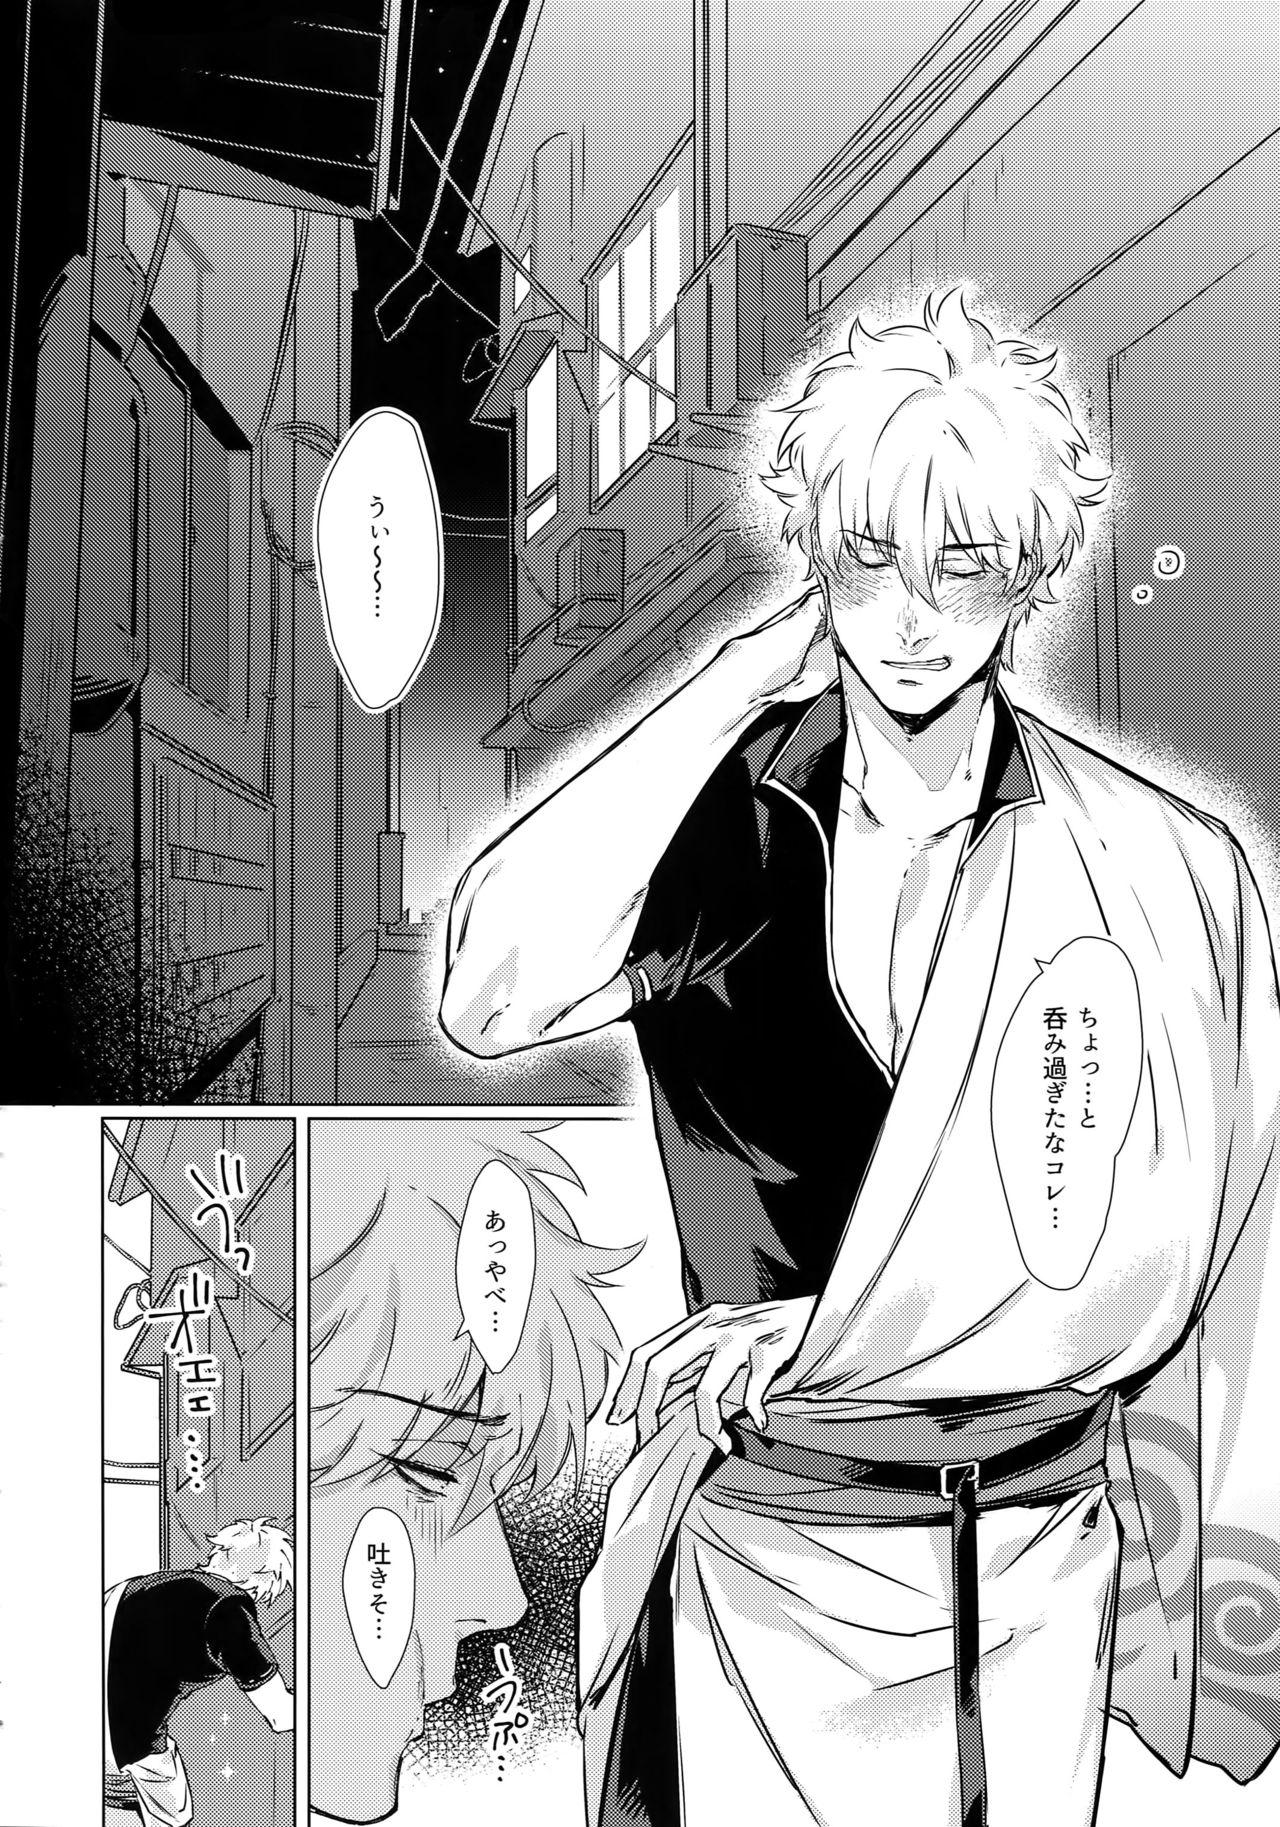 Baile Another Edge 1 - Gintama Show - Page 5